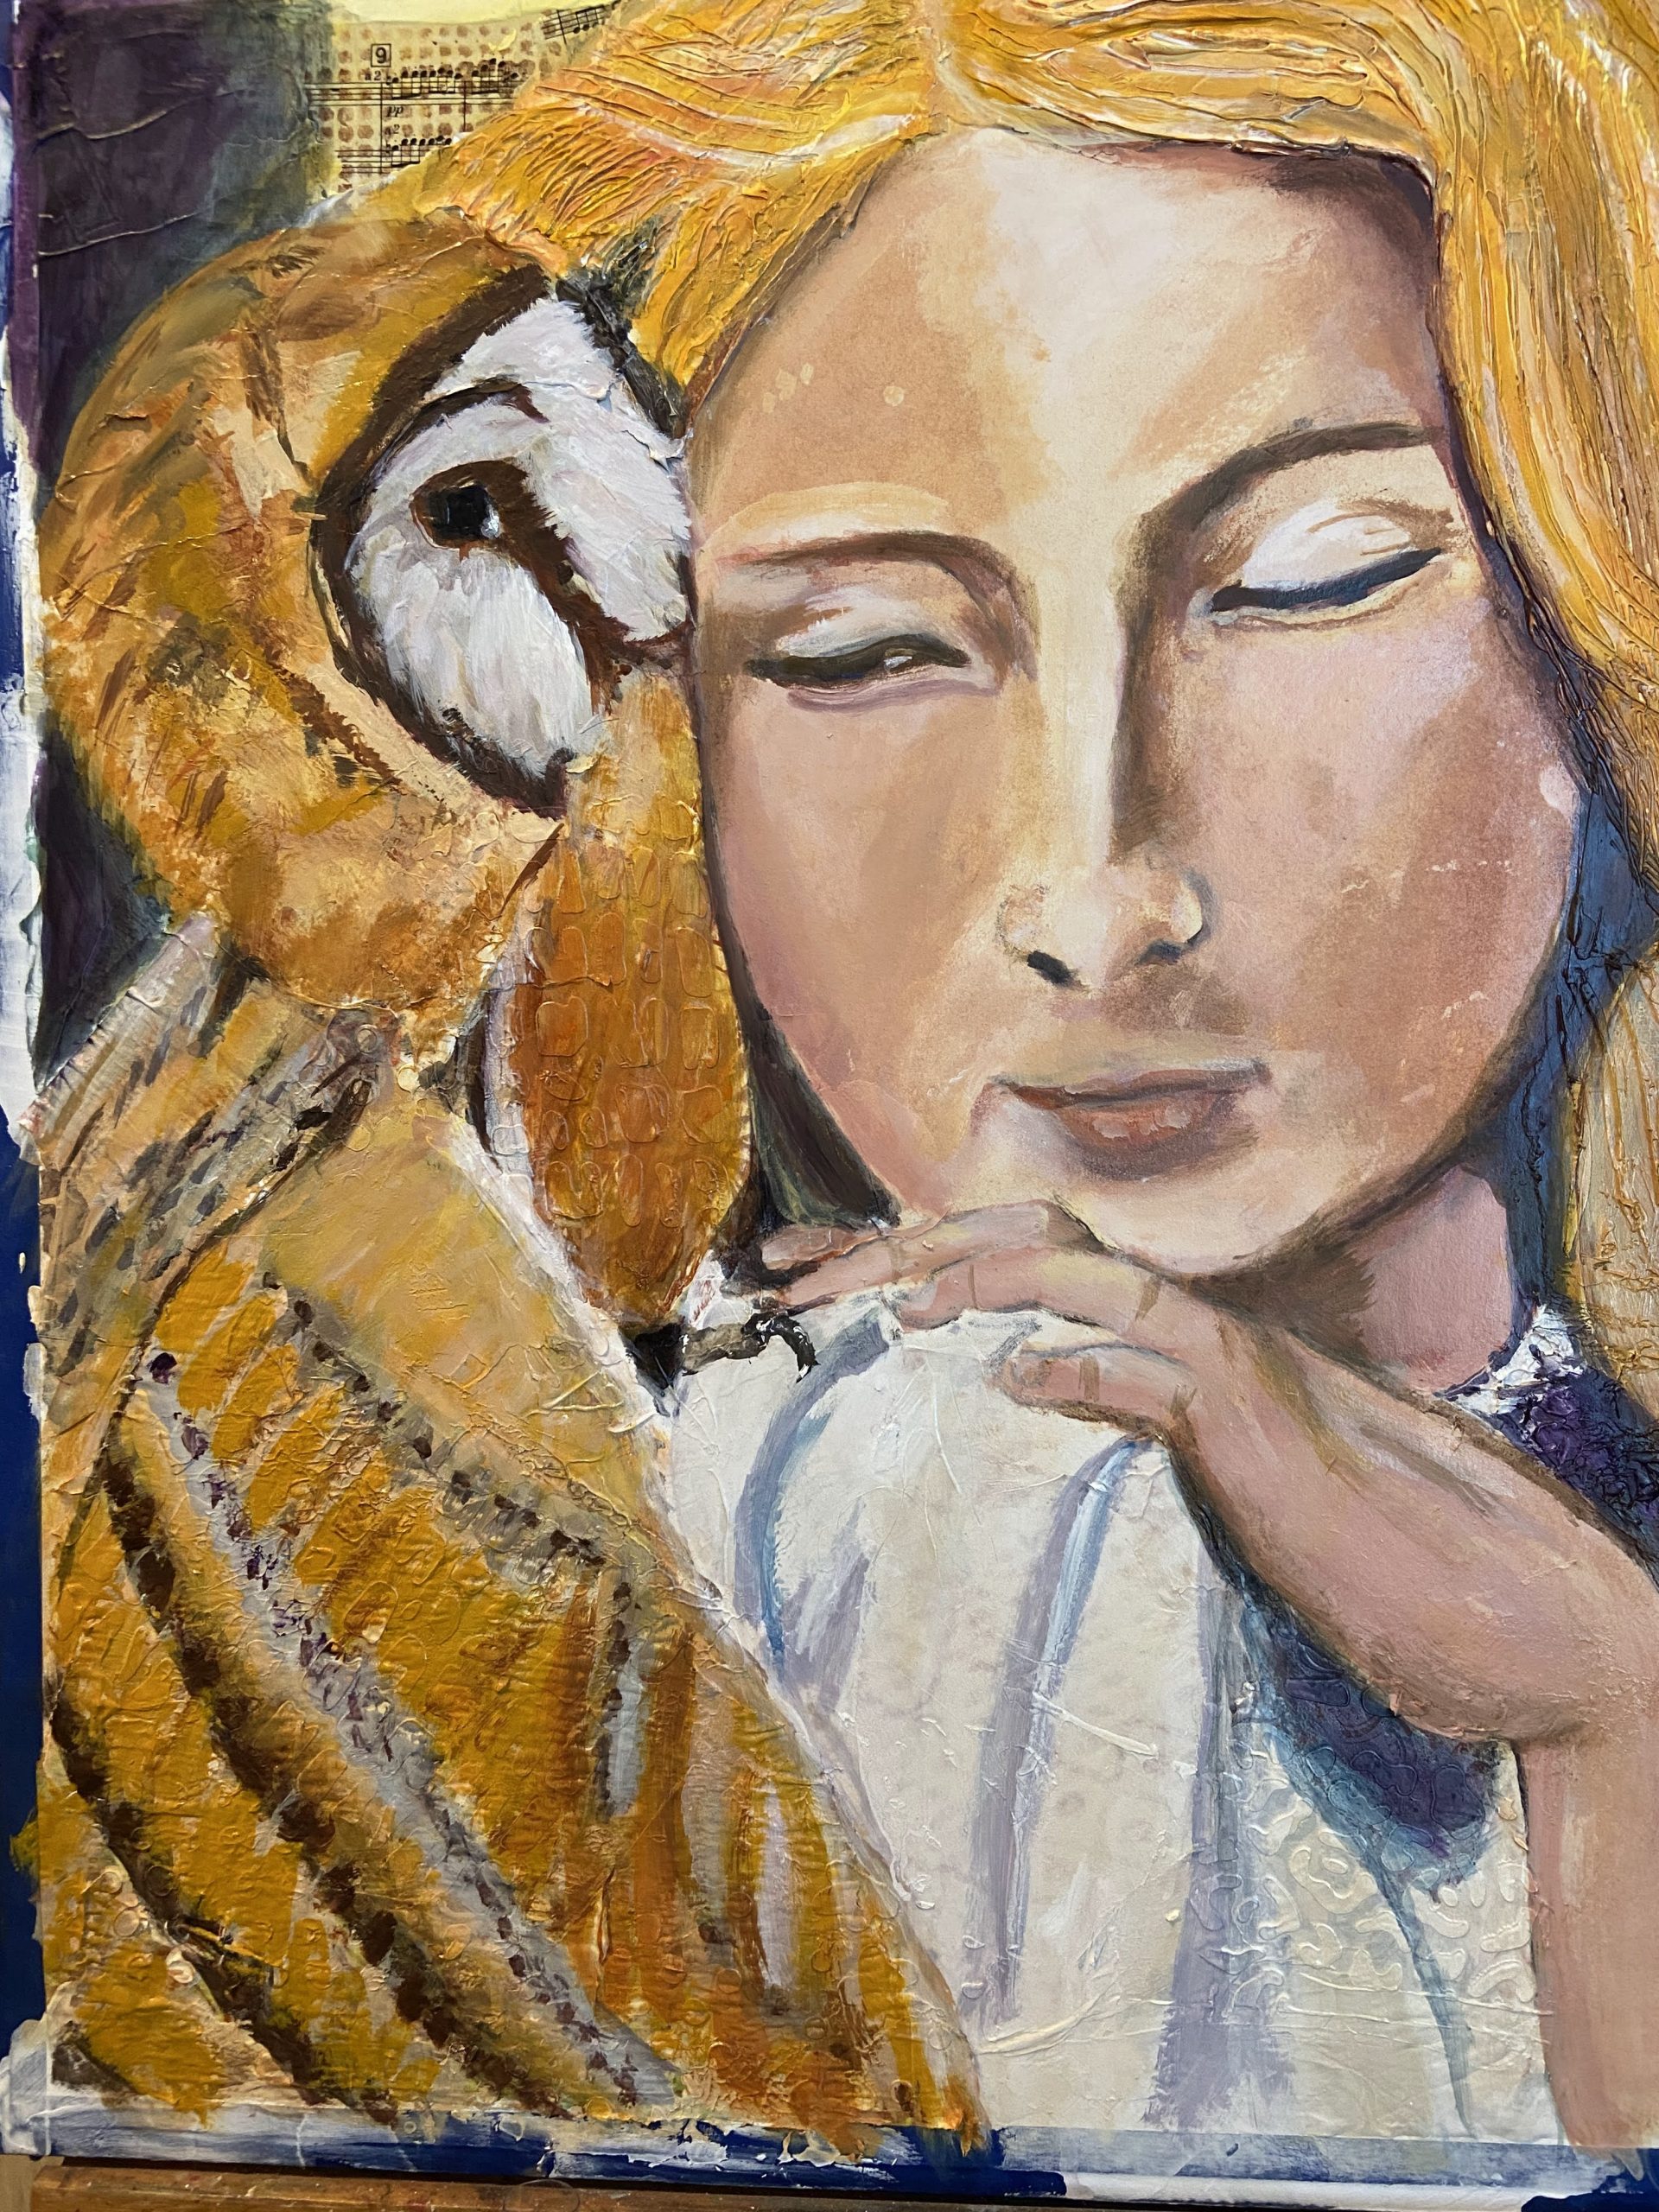 Mixed media painting of a girl with an owl on her shoulder using collage, texture paste, and acrylic paint.